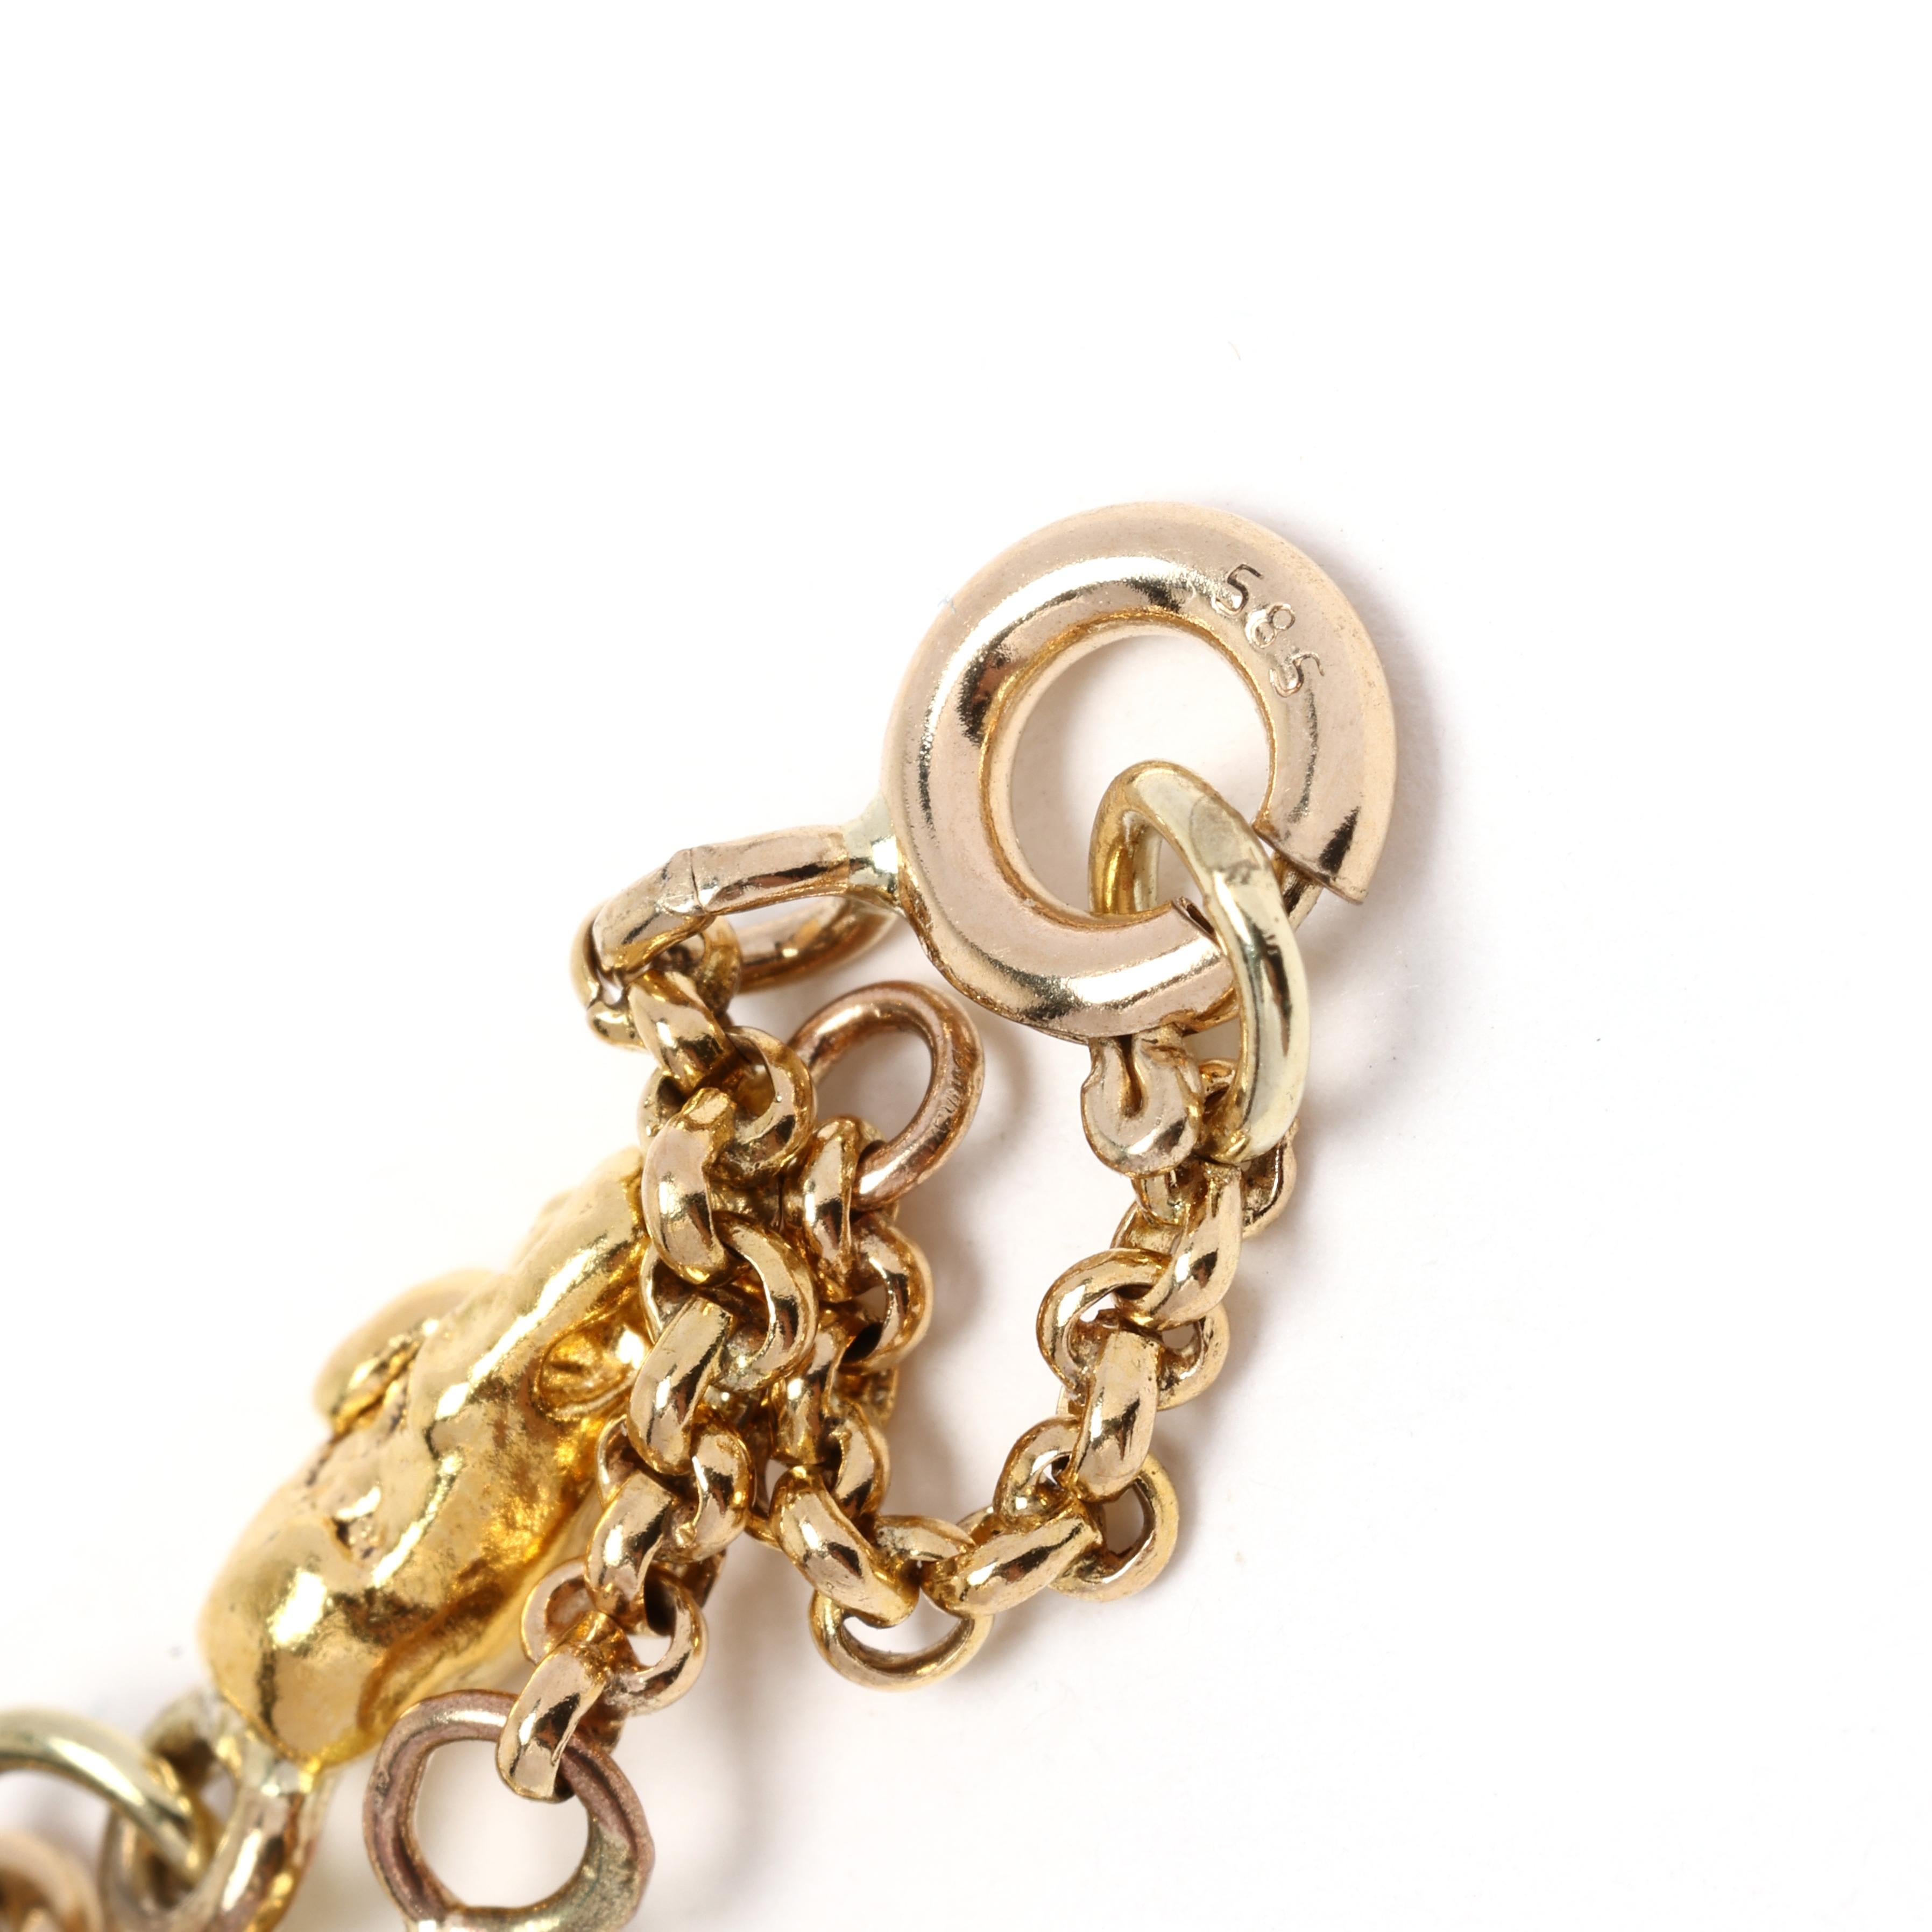 22k Gold Nugget Bracelet, 18k Yellow Gold Chain, Length 7 Inches, Stackable In Good Condition For Sale In McLeansville, NC